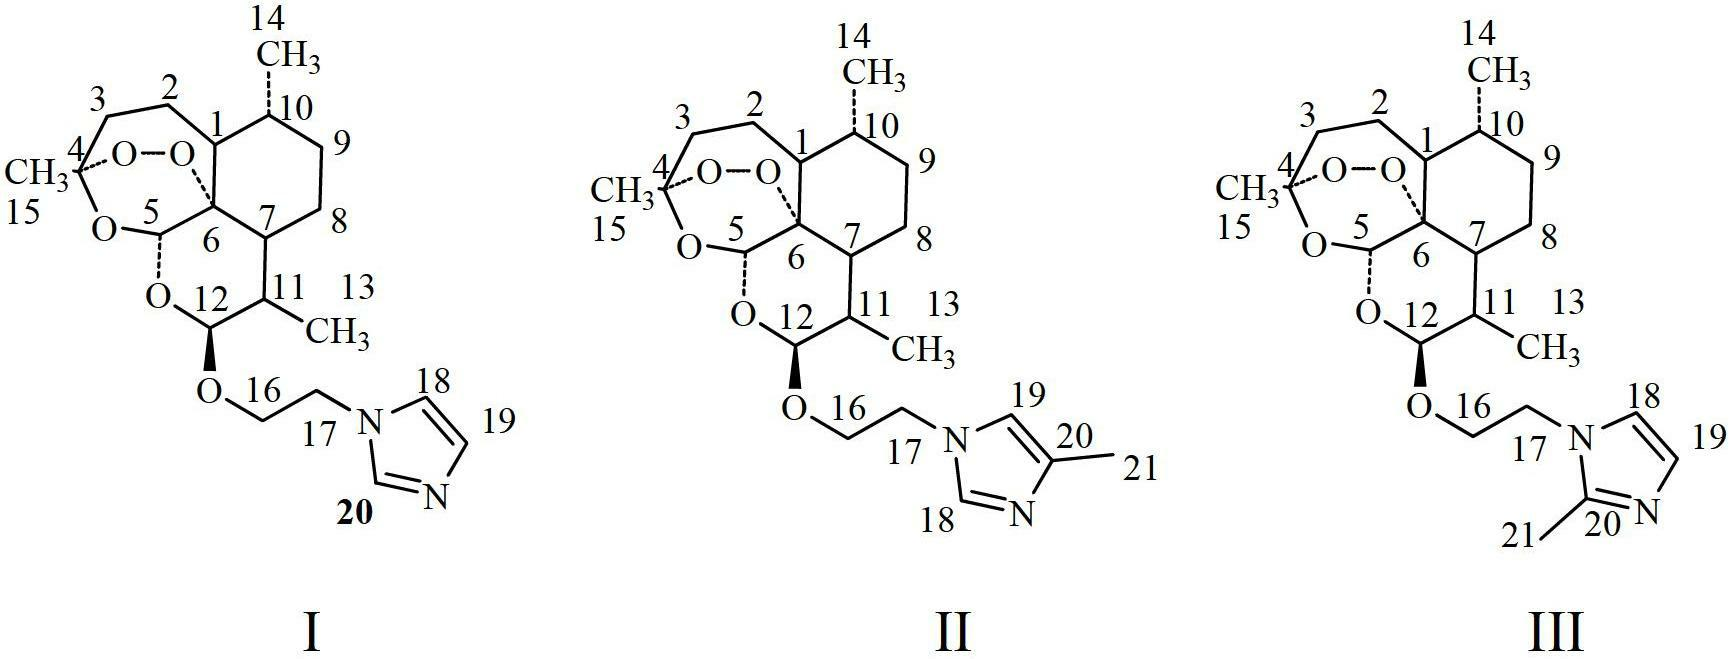 Dihydroarteannuin derivatives and application thereof